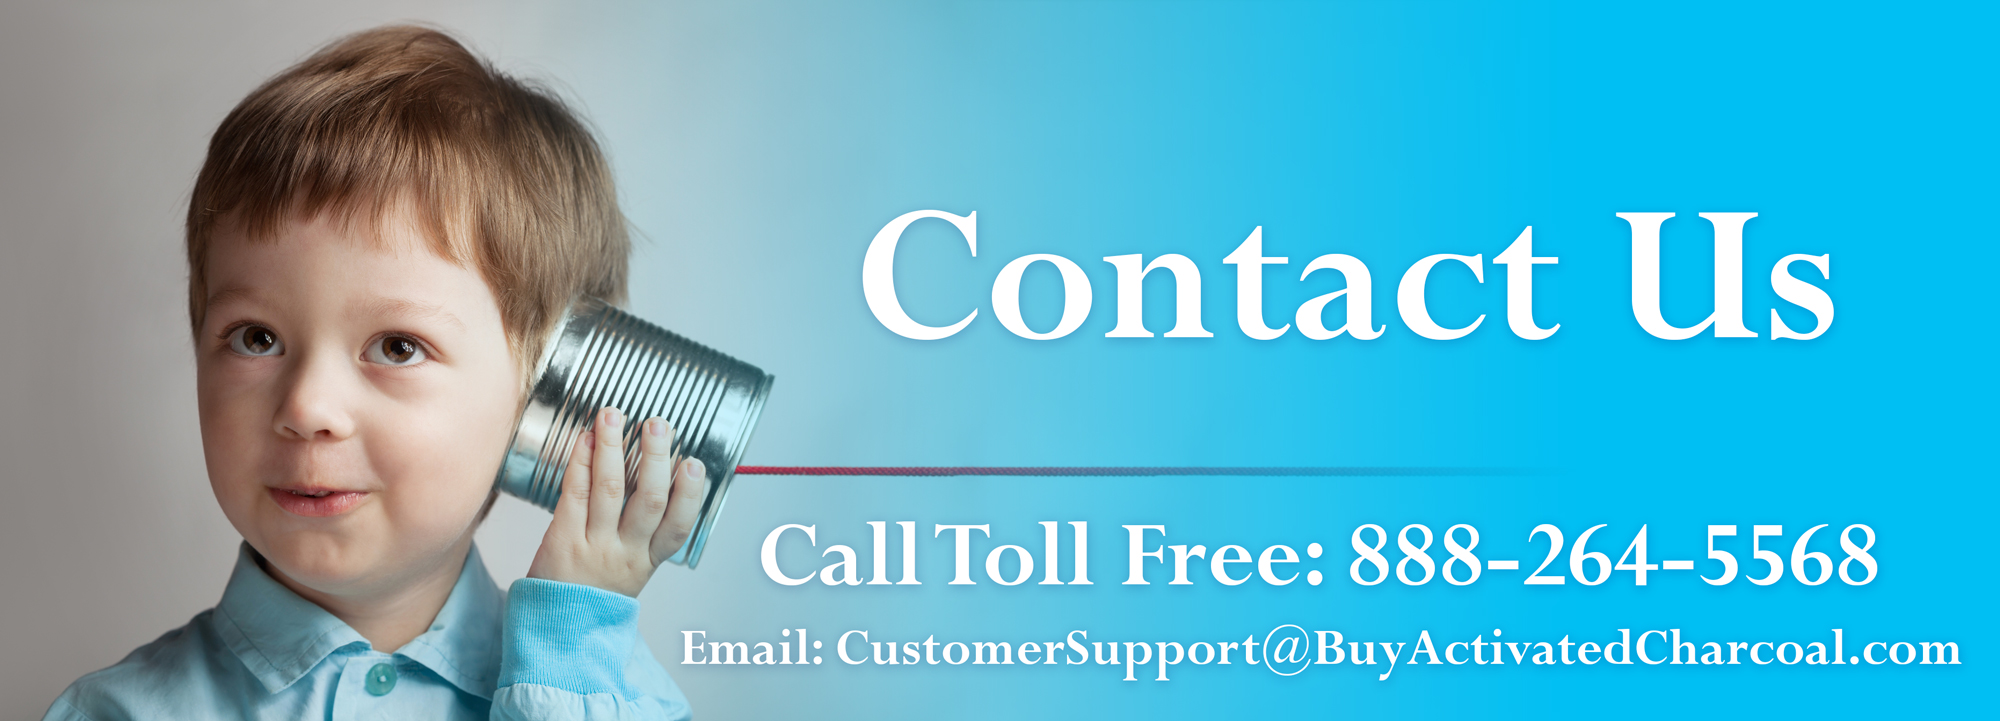 Contact us Banner